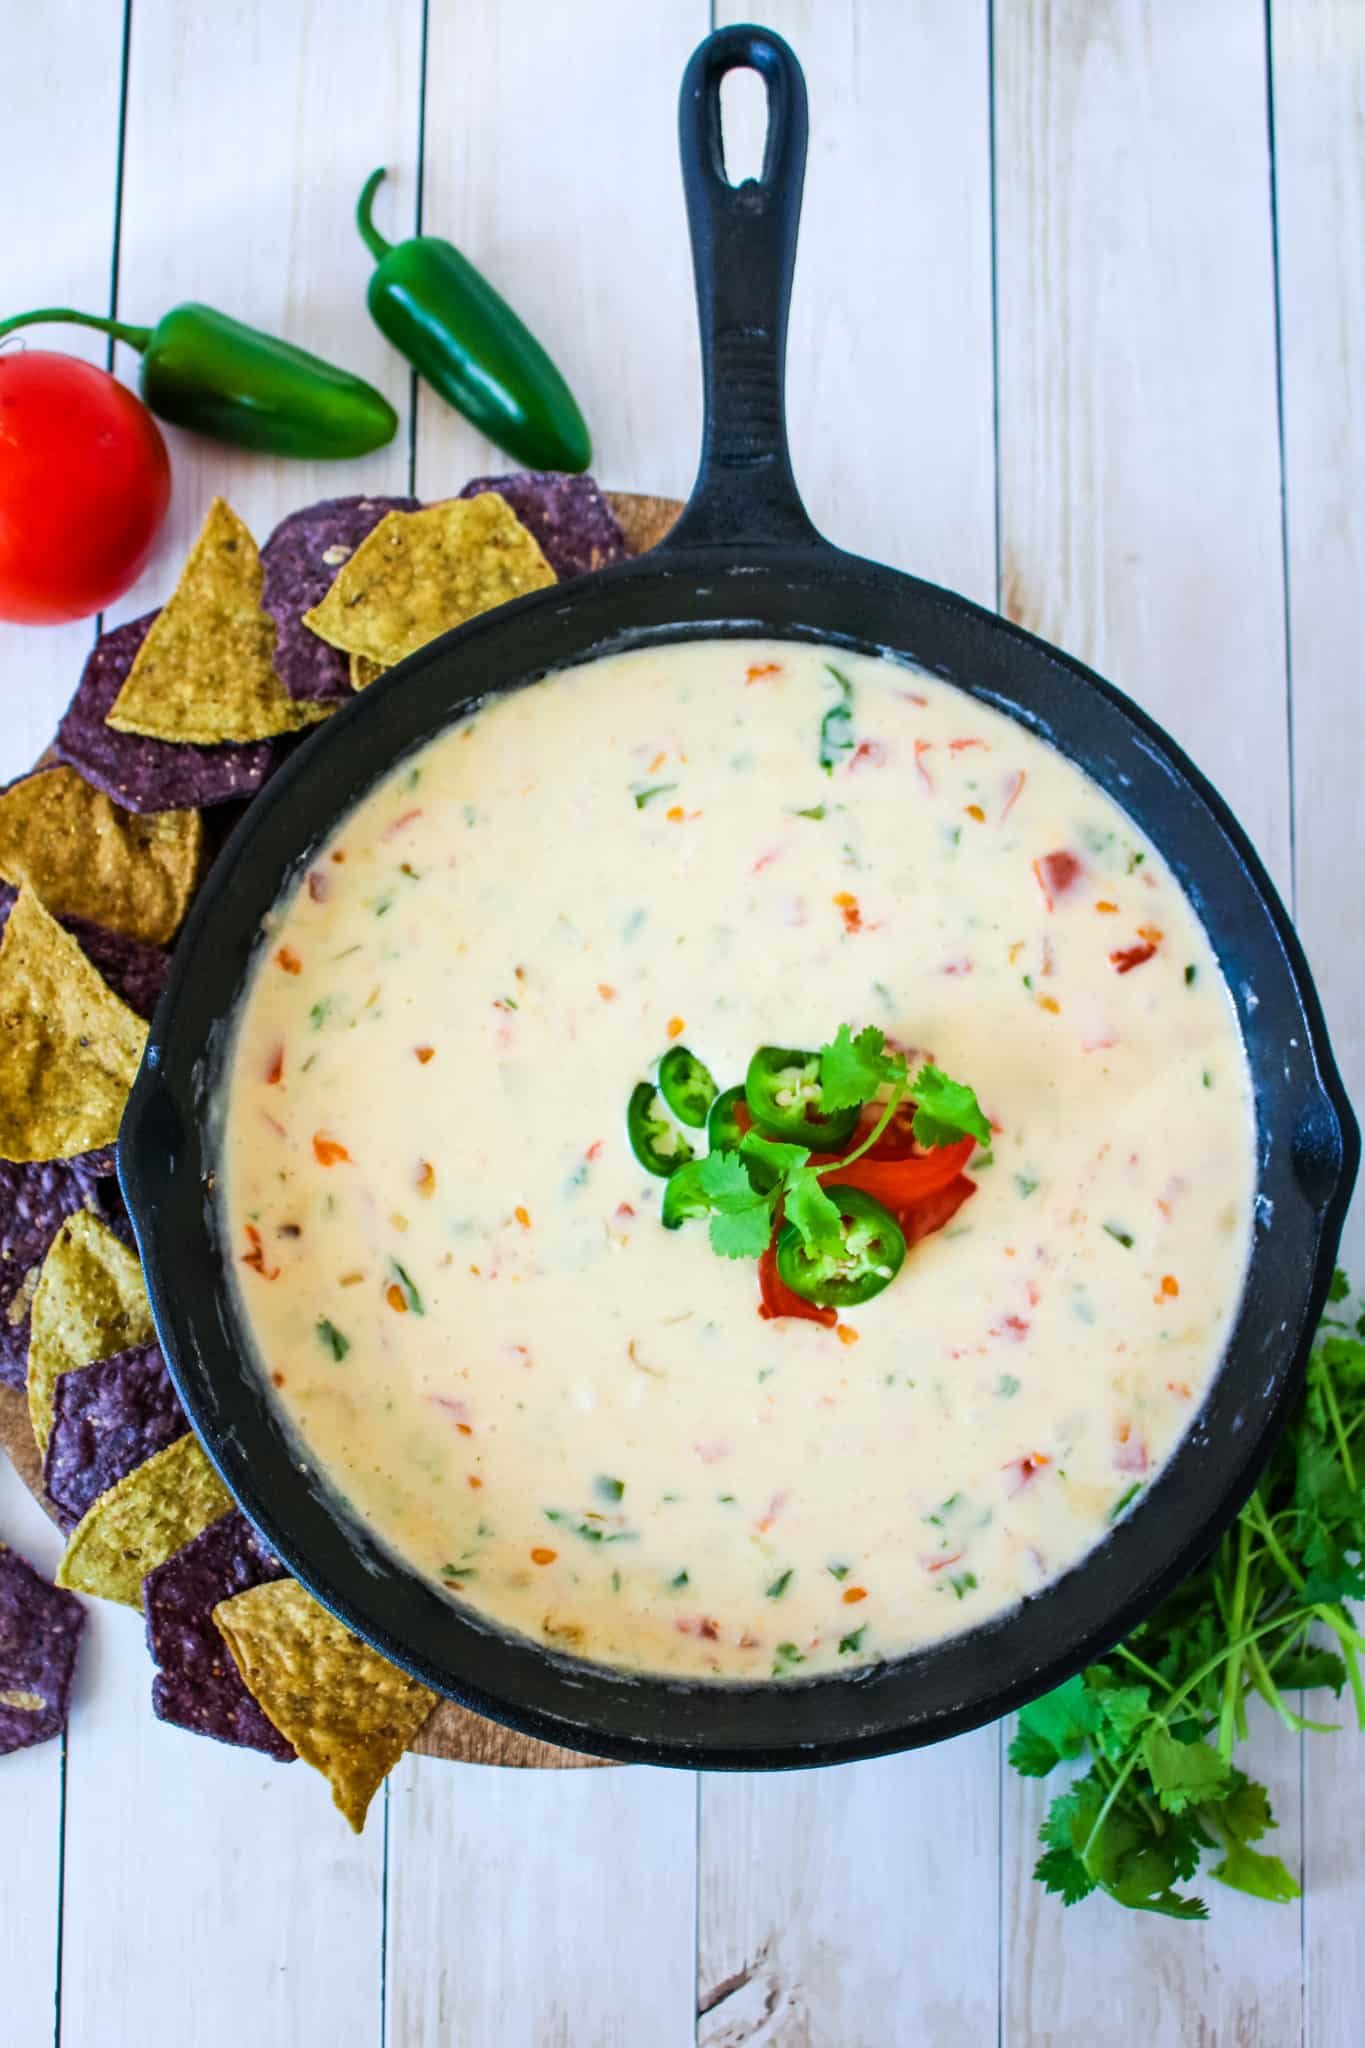 Homemade white queso dip in a cast iron skillet, with tortilla chips being served on the side.